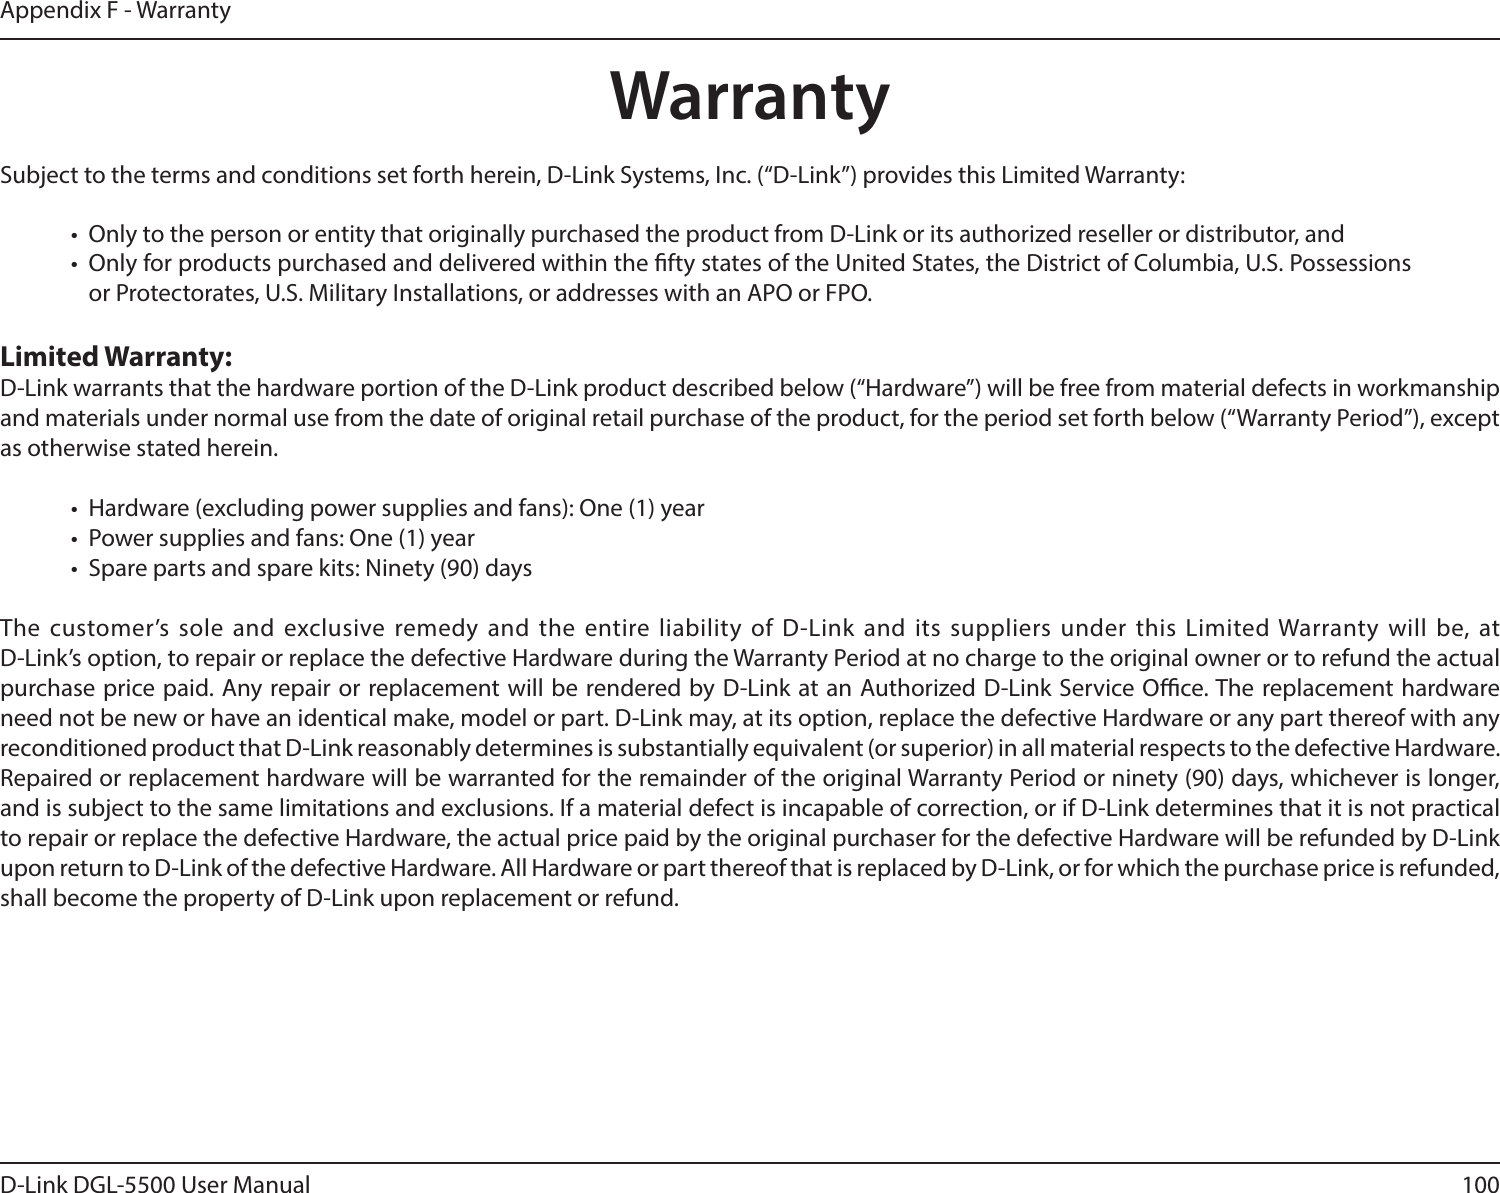 100D-Link DGL-5500 User ManualAppendix F - WarrantyWarrantySubject to the terms and conditions set forth herein, D-Link Systems, Inc. (“D-Link”) provides this Limited Warranty:•  Only to the person or entity that originally purchased the product from D-Link or its authorized reseller or distributor, and•  Only for products purchased and delivered within the fty states of the United States, the District of Columbia, U.S. Possessions or Protectorates, U.S. Military Installations, or addresses with an APO or FPO.Limited Warranty:D-Link warrants that the hardware portion of the D-Link product described below (“Hardware”) will be free from material defects in workmanship and materials under normal use from the date of original retail purchase of the product, for the period set forth below (“Warranty Period”), except as otherwise stated herein.•  Hardware (excluding power supplies and fans): One (1) year•  Power supplies and fans: One (1) year•  Spare parts and spare kits: Ninety (90) daysThe customer’s sole and exclusive remedy and the entire liability of D-Link and its suppliers under this Limited Warranty will be, at  D-Link’s option, to repair or replace the defective Hardware during the Warranty Period at no charge to the original owner or to refund the actual purchase price paid. Any repair or replacement will be rendered by D-Link at an Authorized D-Link Service Oce. The replacement hardware need not be new or have an identical make, model or part. D-Link may, at its option, replace the defective Hardware or any part thereof with any reconditioned product that D-Link reasonably determines is substantially equivalent (or superior) in all material respects to the defective Hardware. Repaired or replacement hardware will be warranted for the remainder of the original Warranty Period or ninety (90) days, whichever is longer, and is subject to the same limitations and exclusions. If a material defect is incapable of correction, or if D-Link determines that it is not practical to repair or replace the defective Hardware, the actual price paid by the original purchaser for the defective Hardware will be refunded by D-Link upon return to D-Link of the defective Hardware. All Hardware or part thereof that is replaced by D-Link, or for which the purchase price is refunded, shall become the property of D-Link upon replacement or refund.